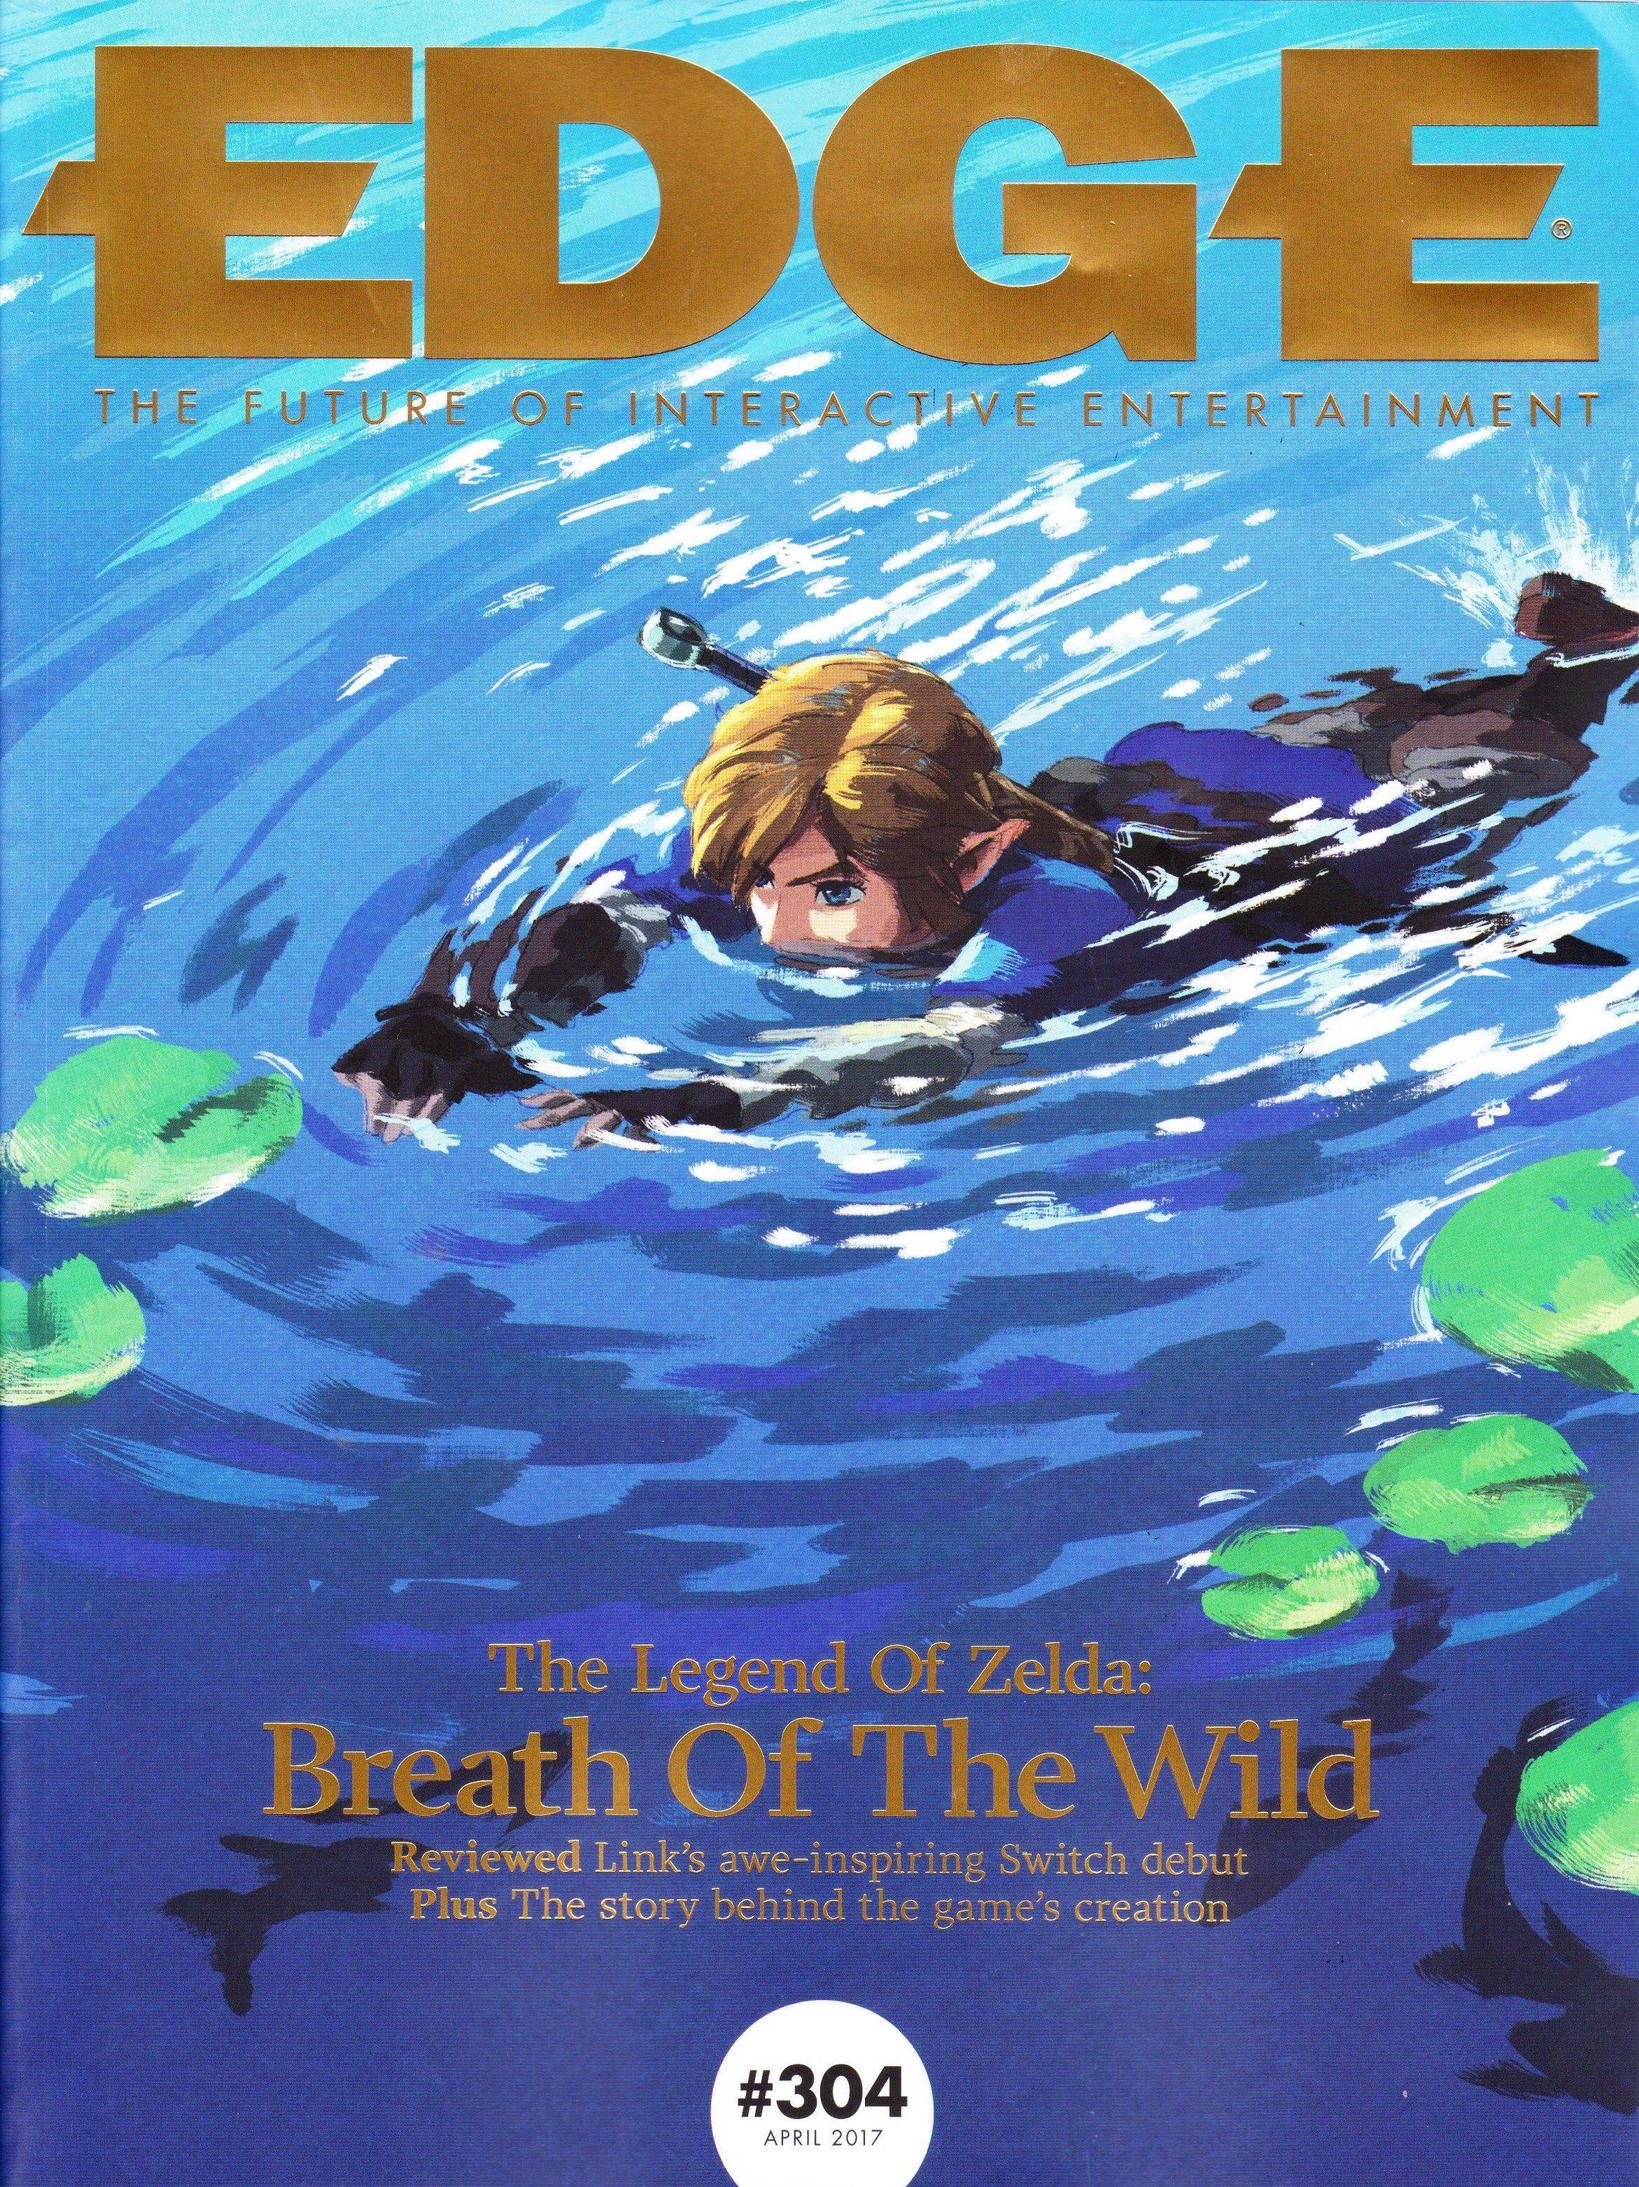 EDGE Magazine has the first review out for The Legend of Zelda: Breath of the Wild